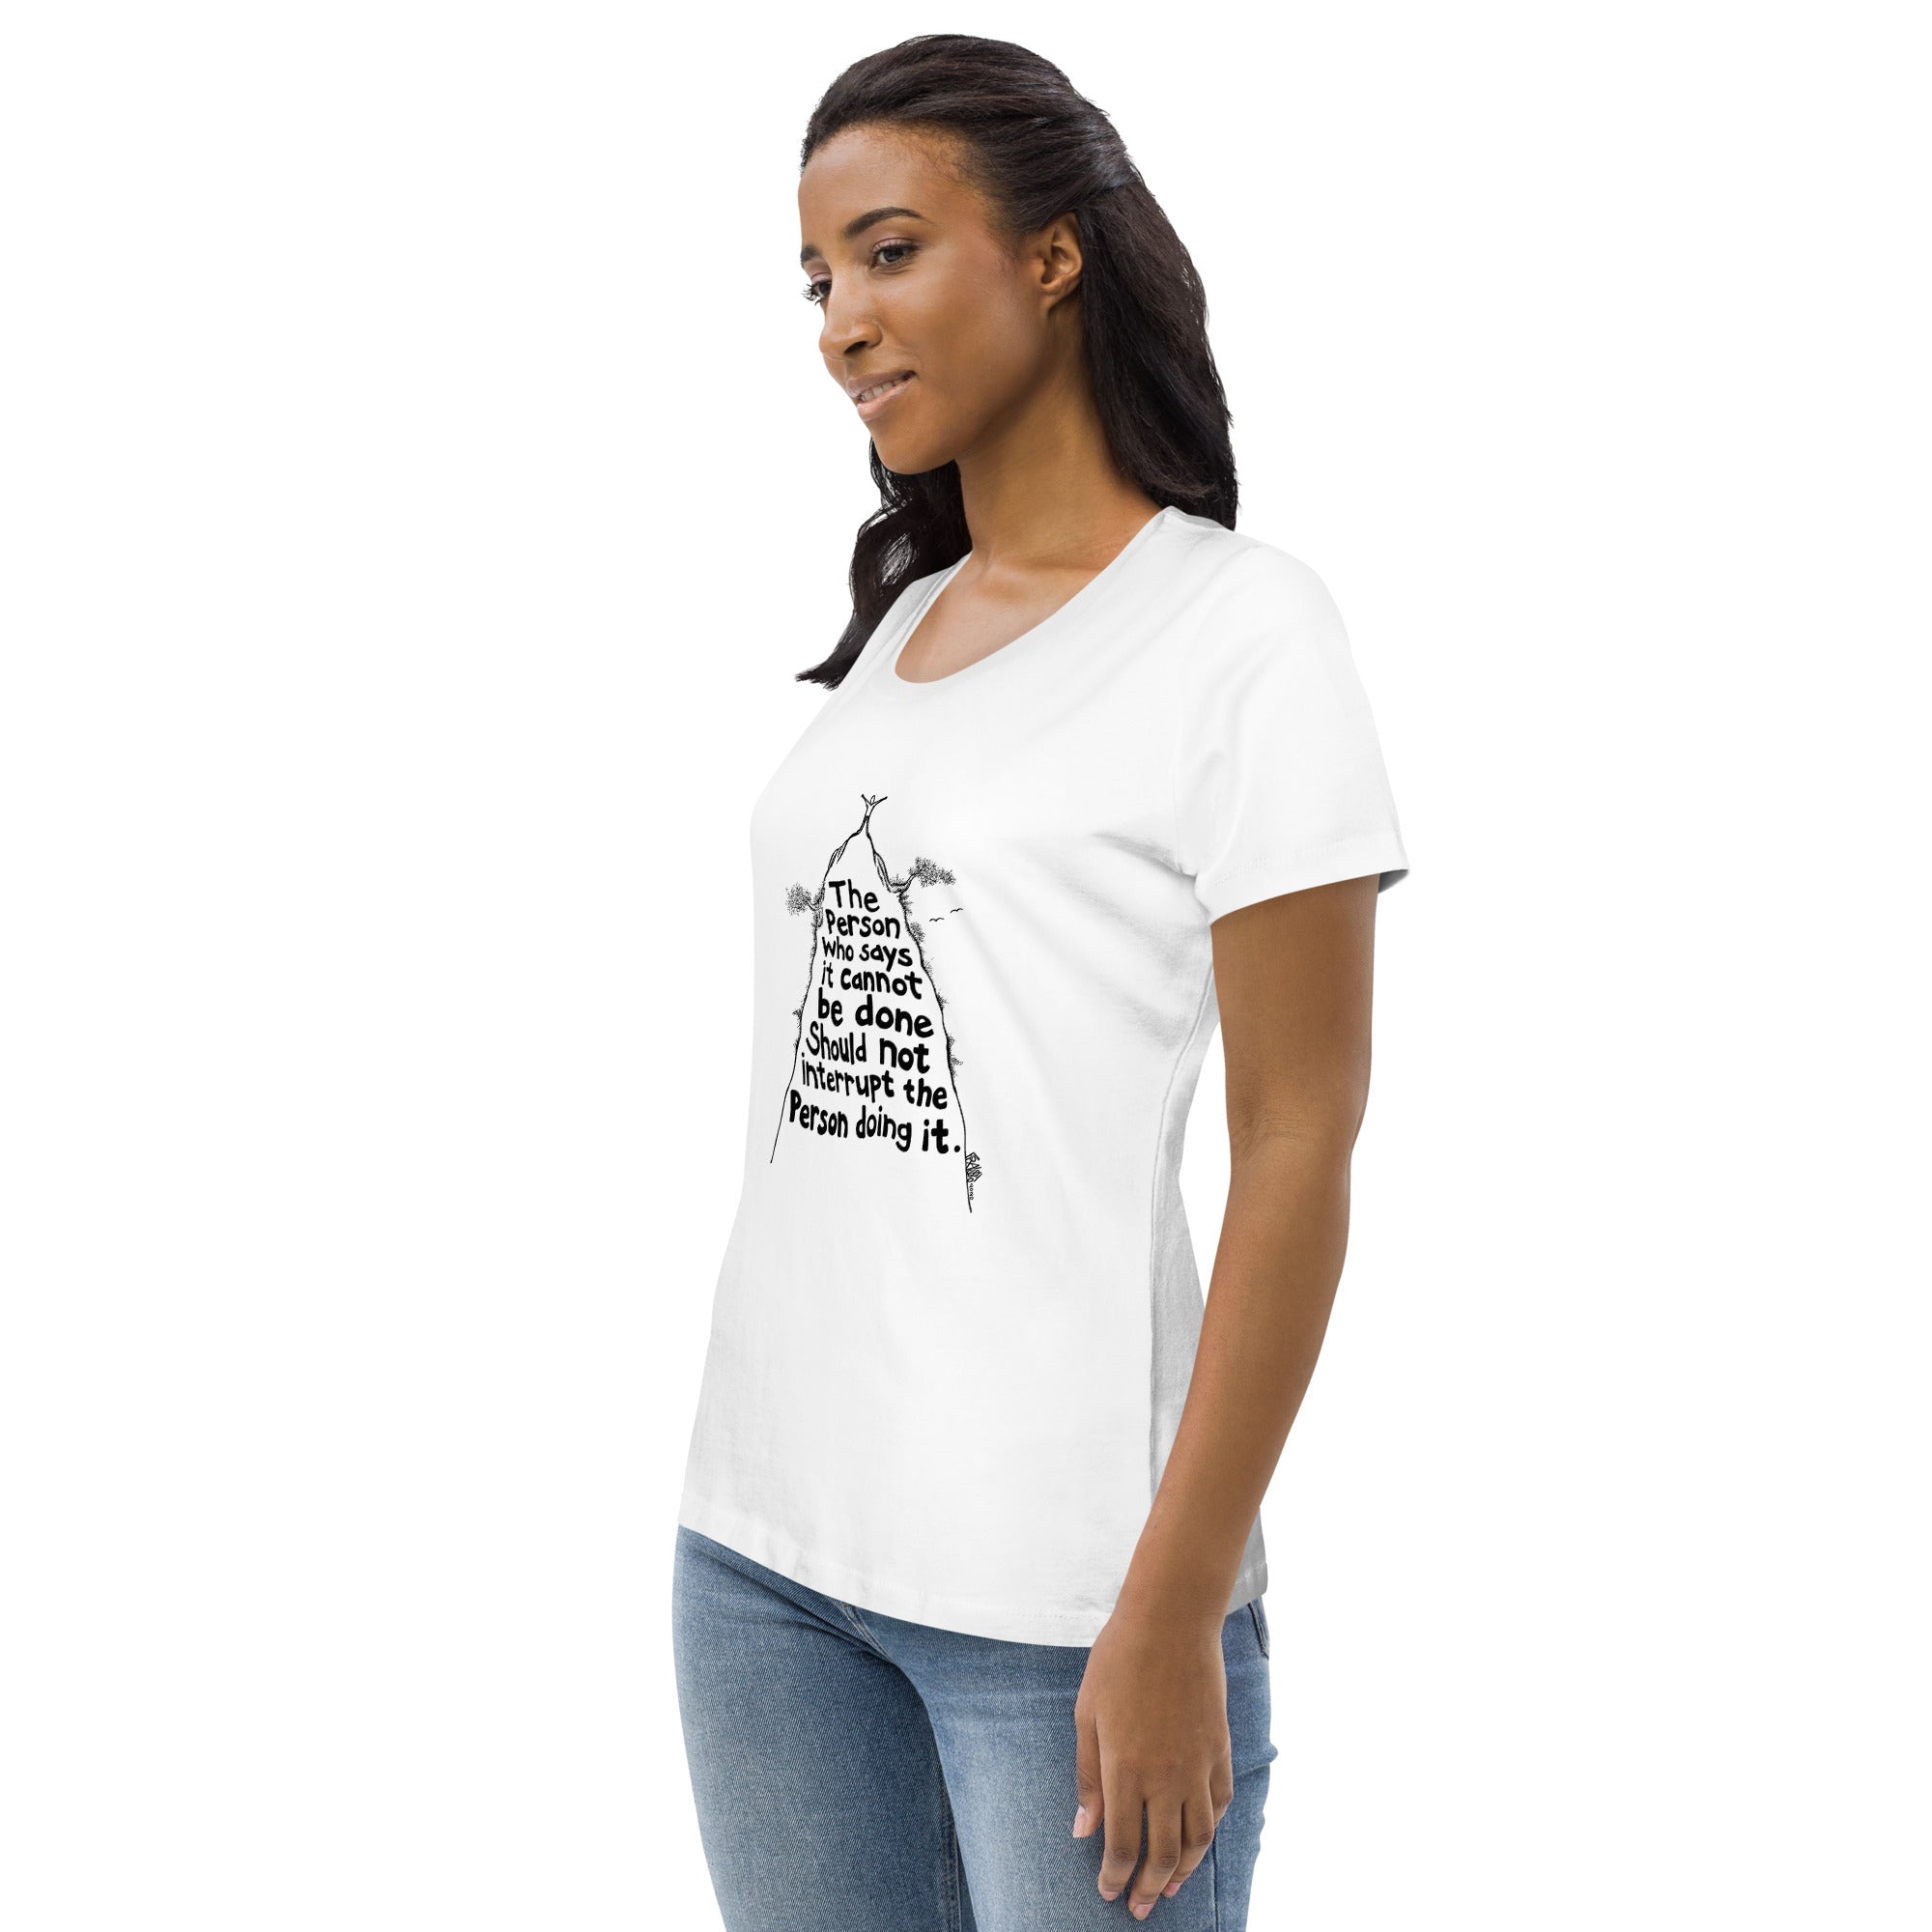 Mountain Top Organic Cotton Scoop Neck T-Shirt In White By Artist Rick Frausto